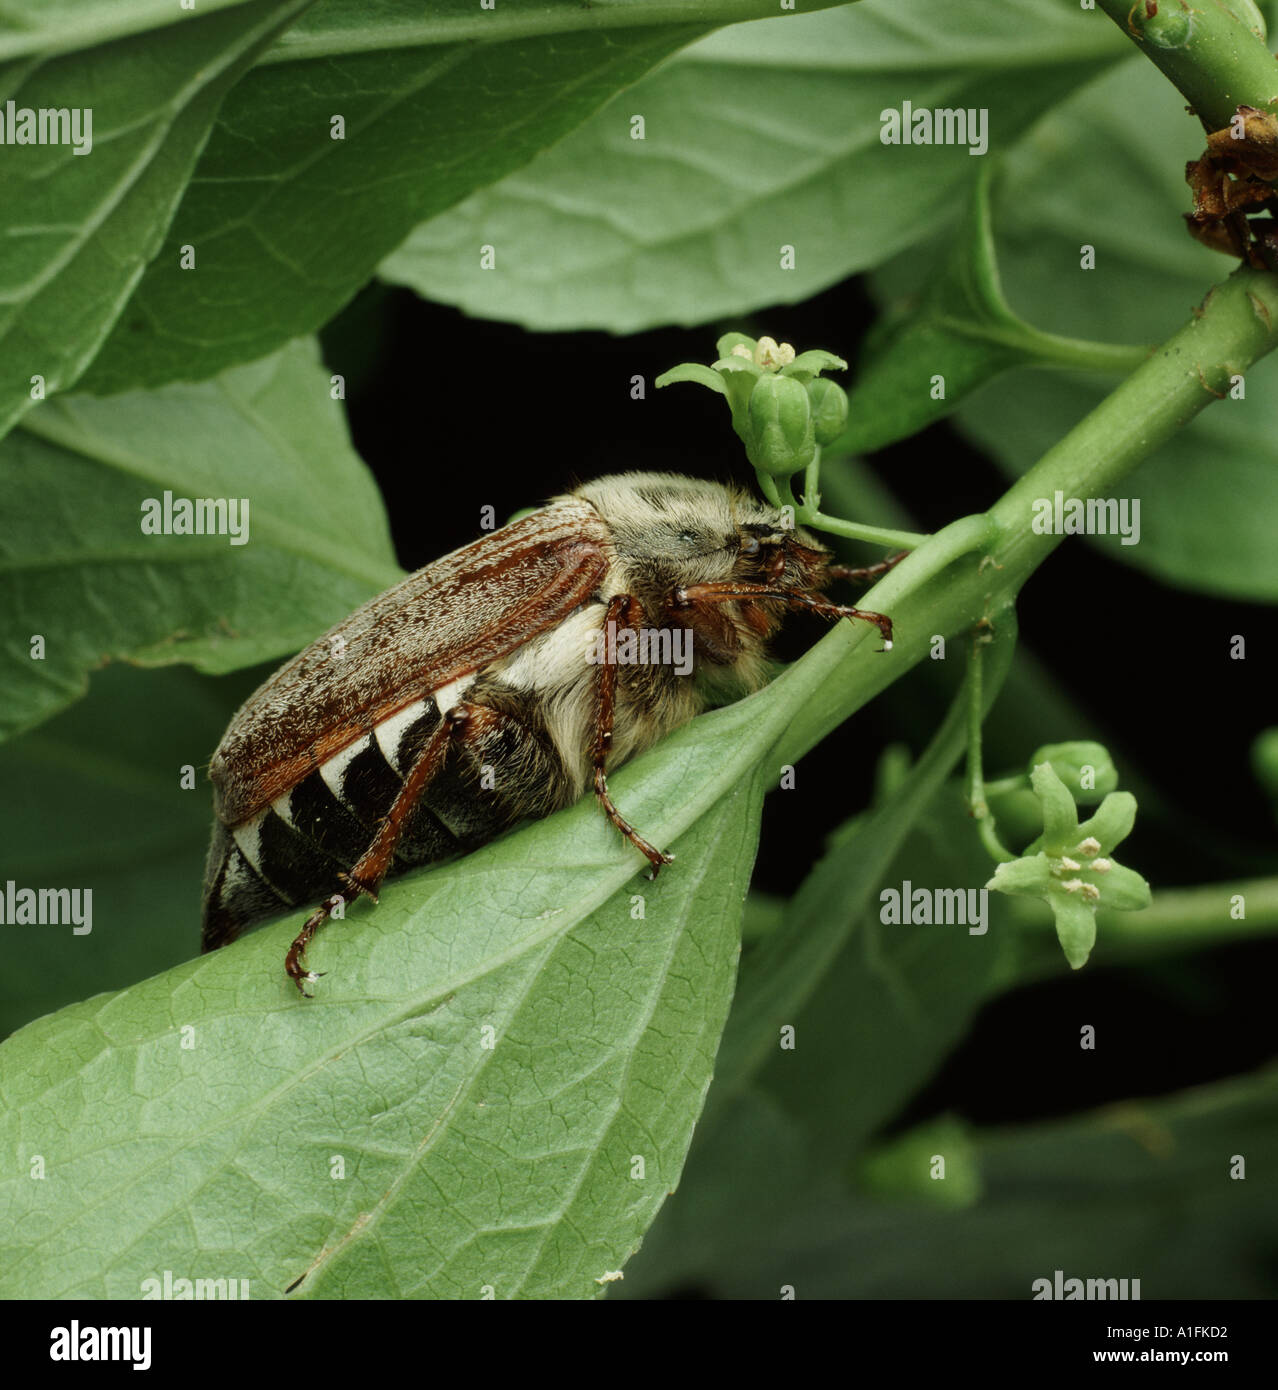 Adult cockchafer beetle Melolontha melolontha Stock Photo